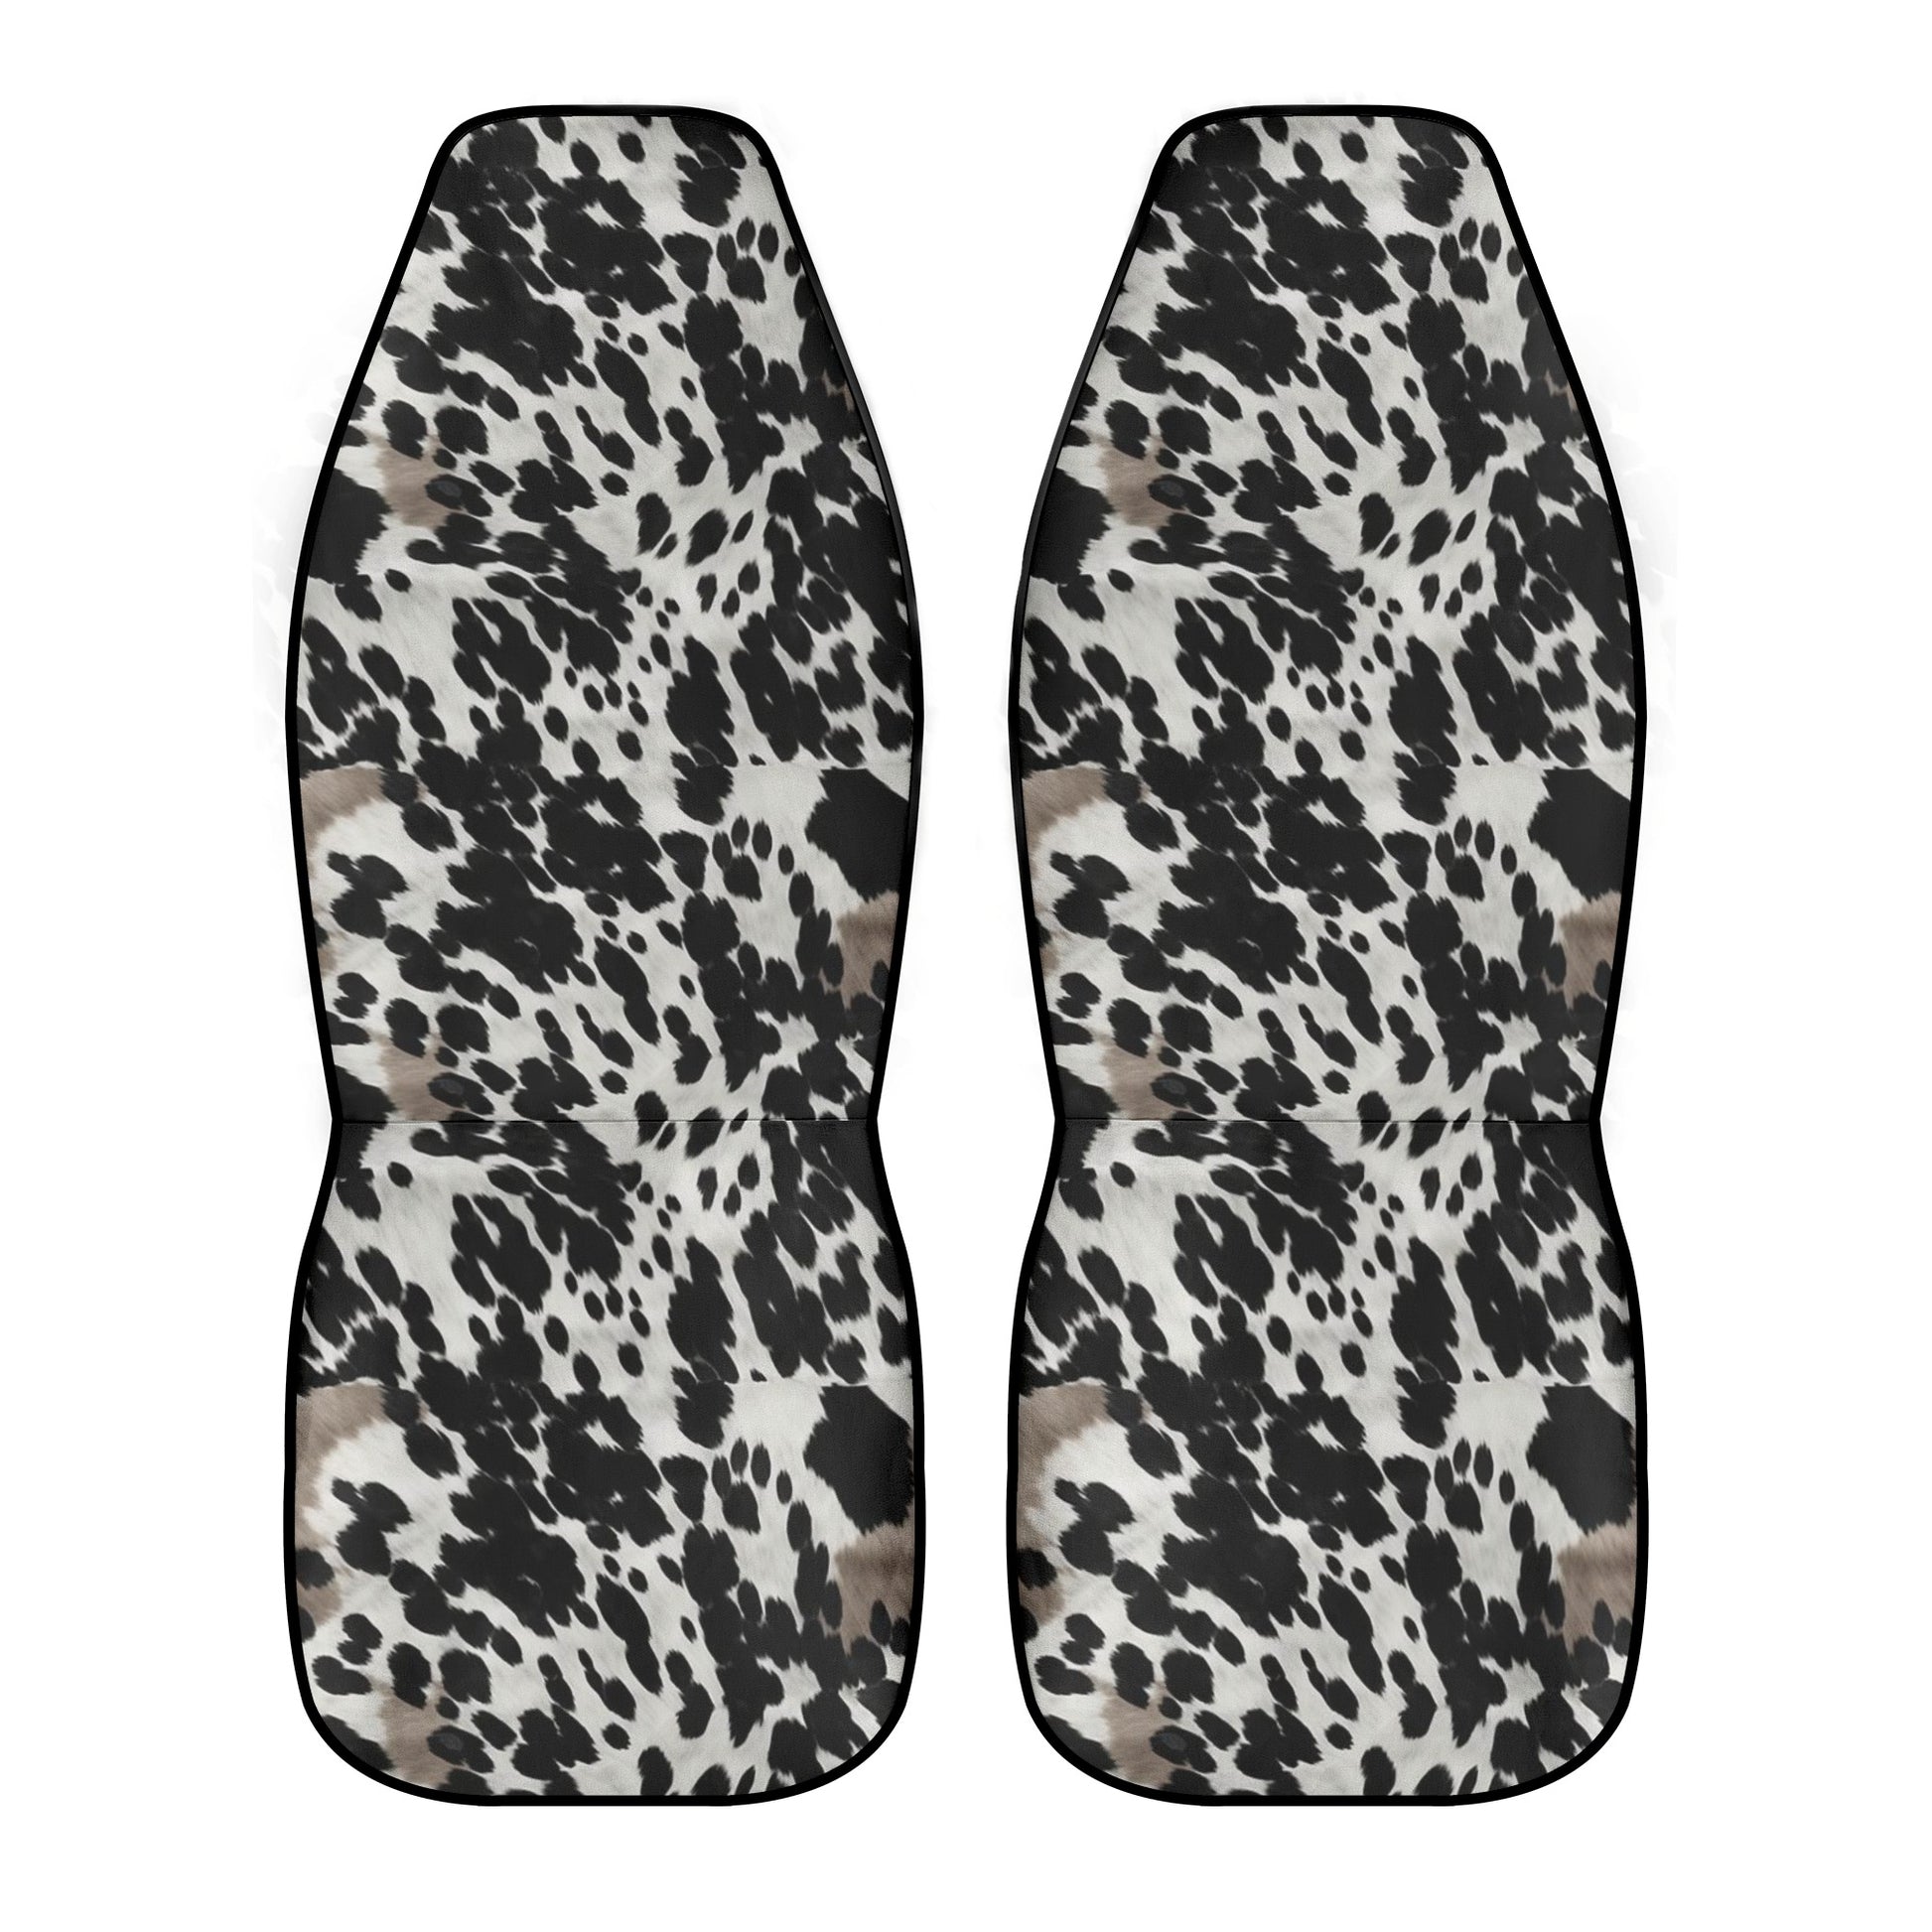 Cow Print Car Seat Covers (2 pcs), Black White Brown Pattern Auto Front Seat Dog Pet Vehicle SUV Universal Protector Accessory Men Women Starcove Fashion